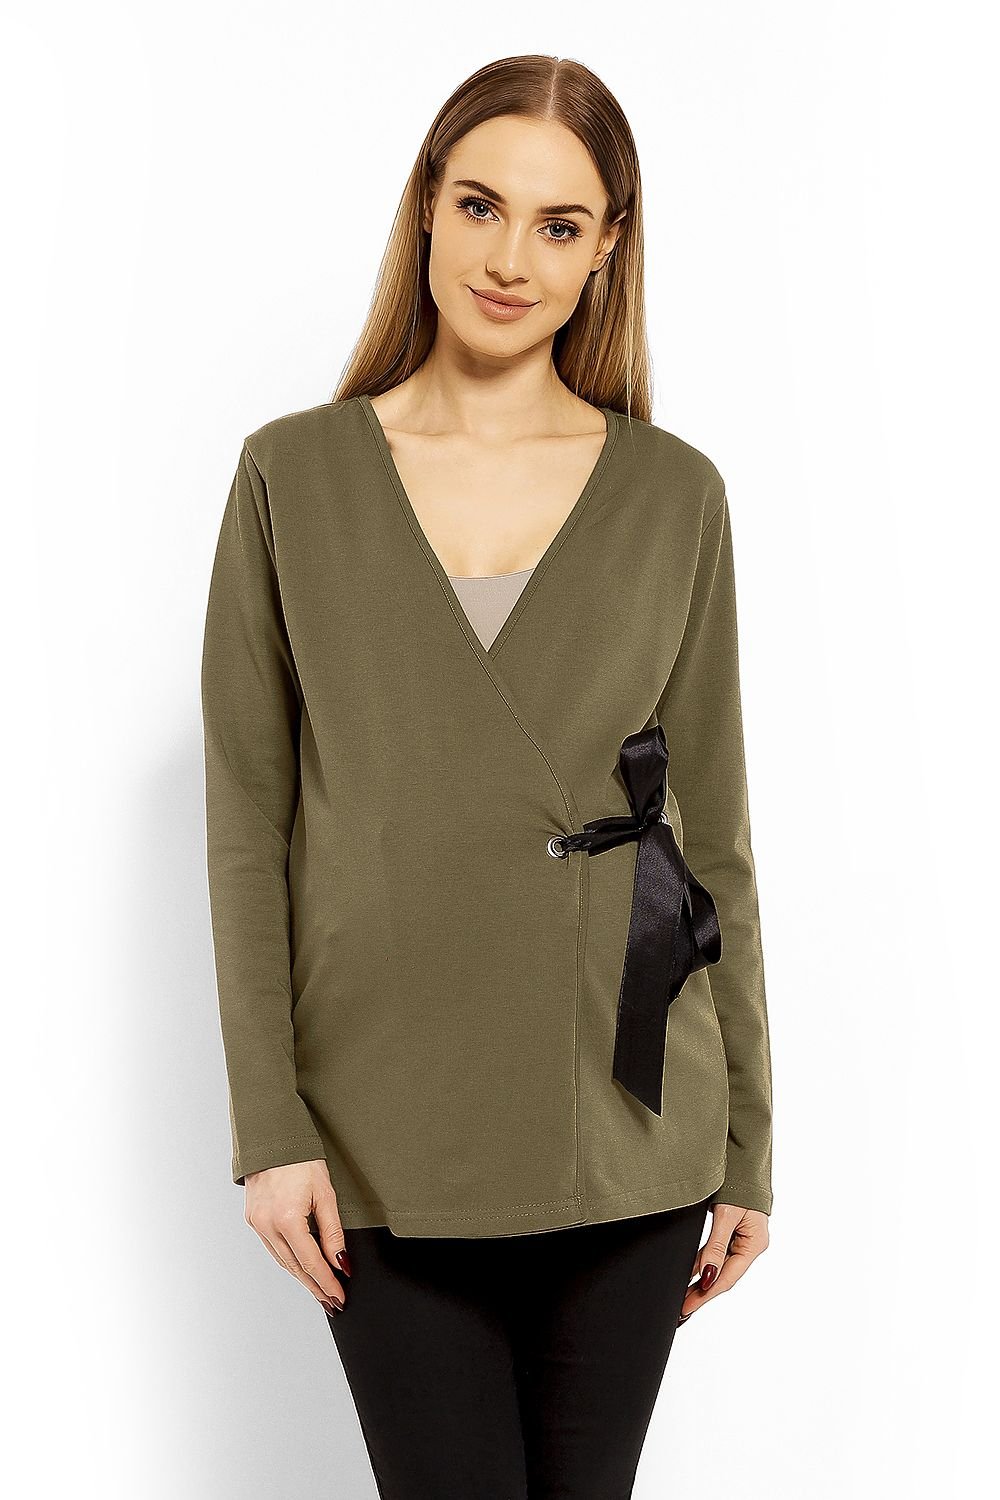 Front Wrap with Tie Maternity Blouse Top